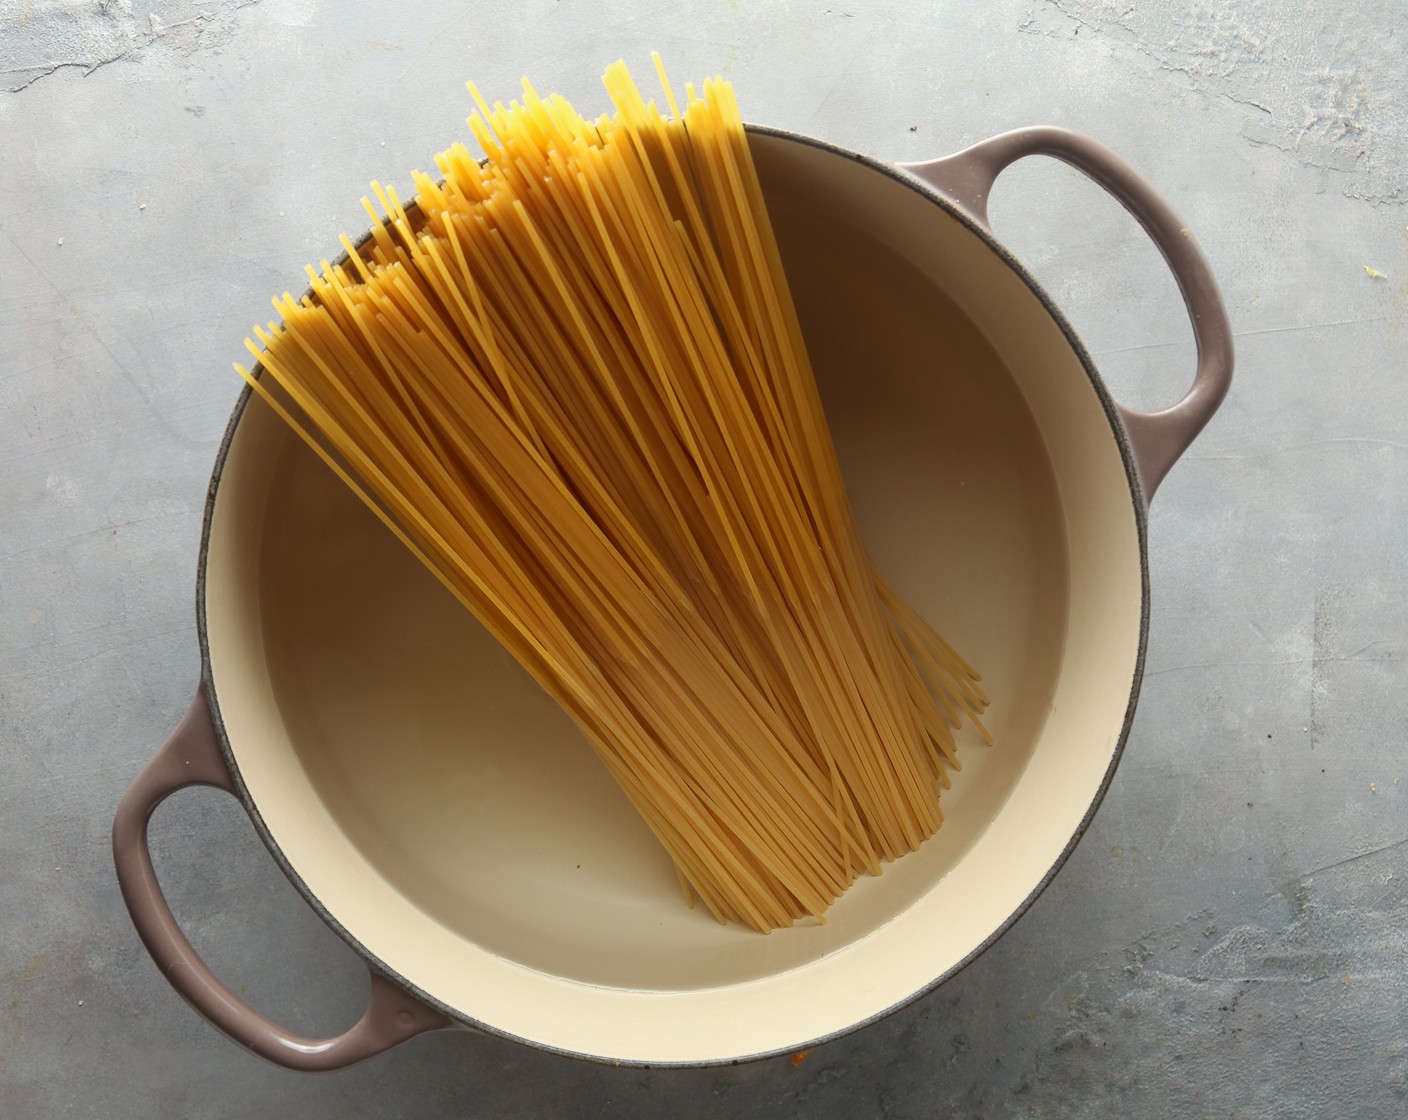 step 1 Bring a large pot of salted water to a boil. Add the Spaghetti (1 lb) and cook for 10 minutes, or as directed by the package.